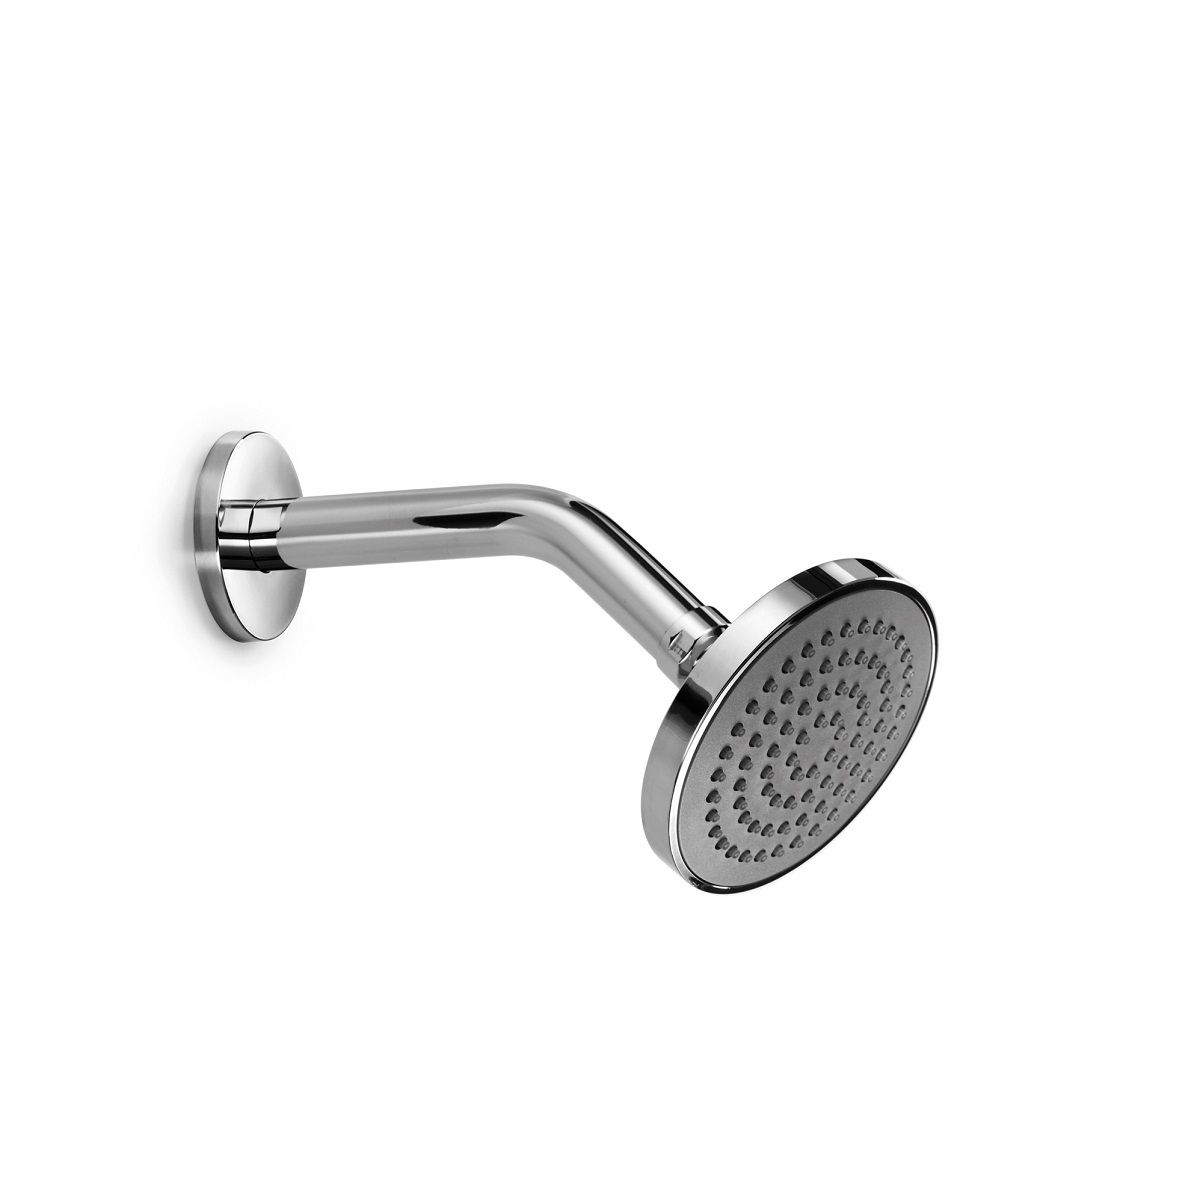 High Quality Shower Heads are Essential - Supioni Shower Head